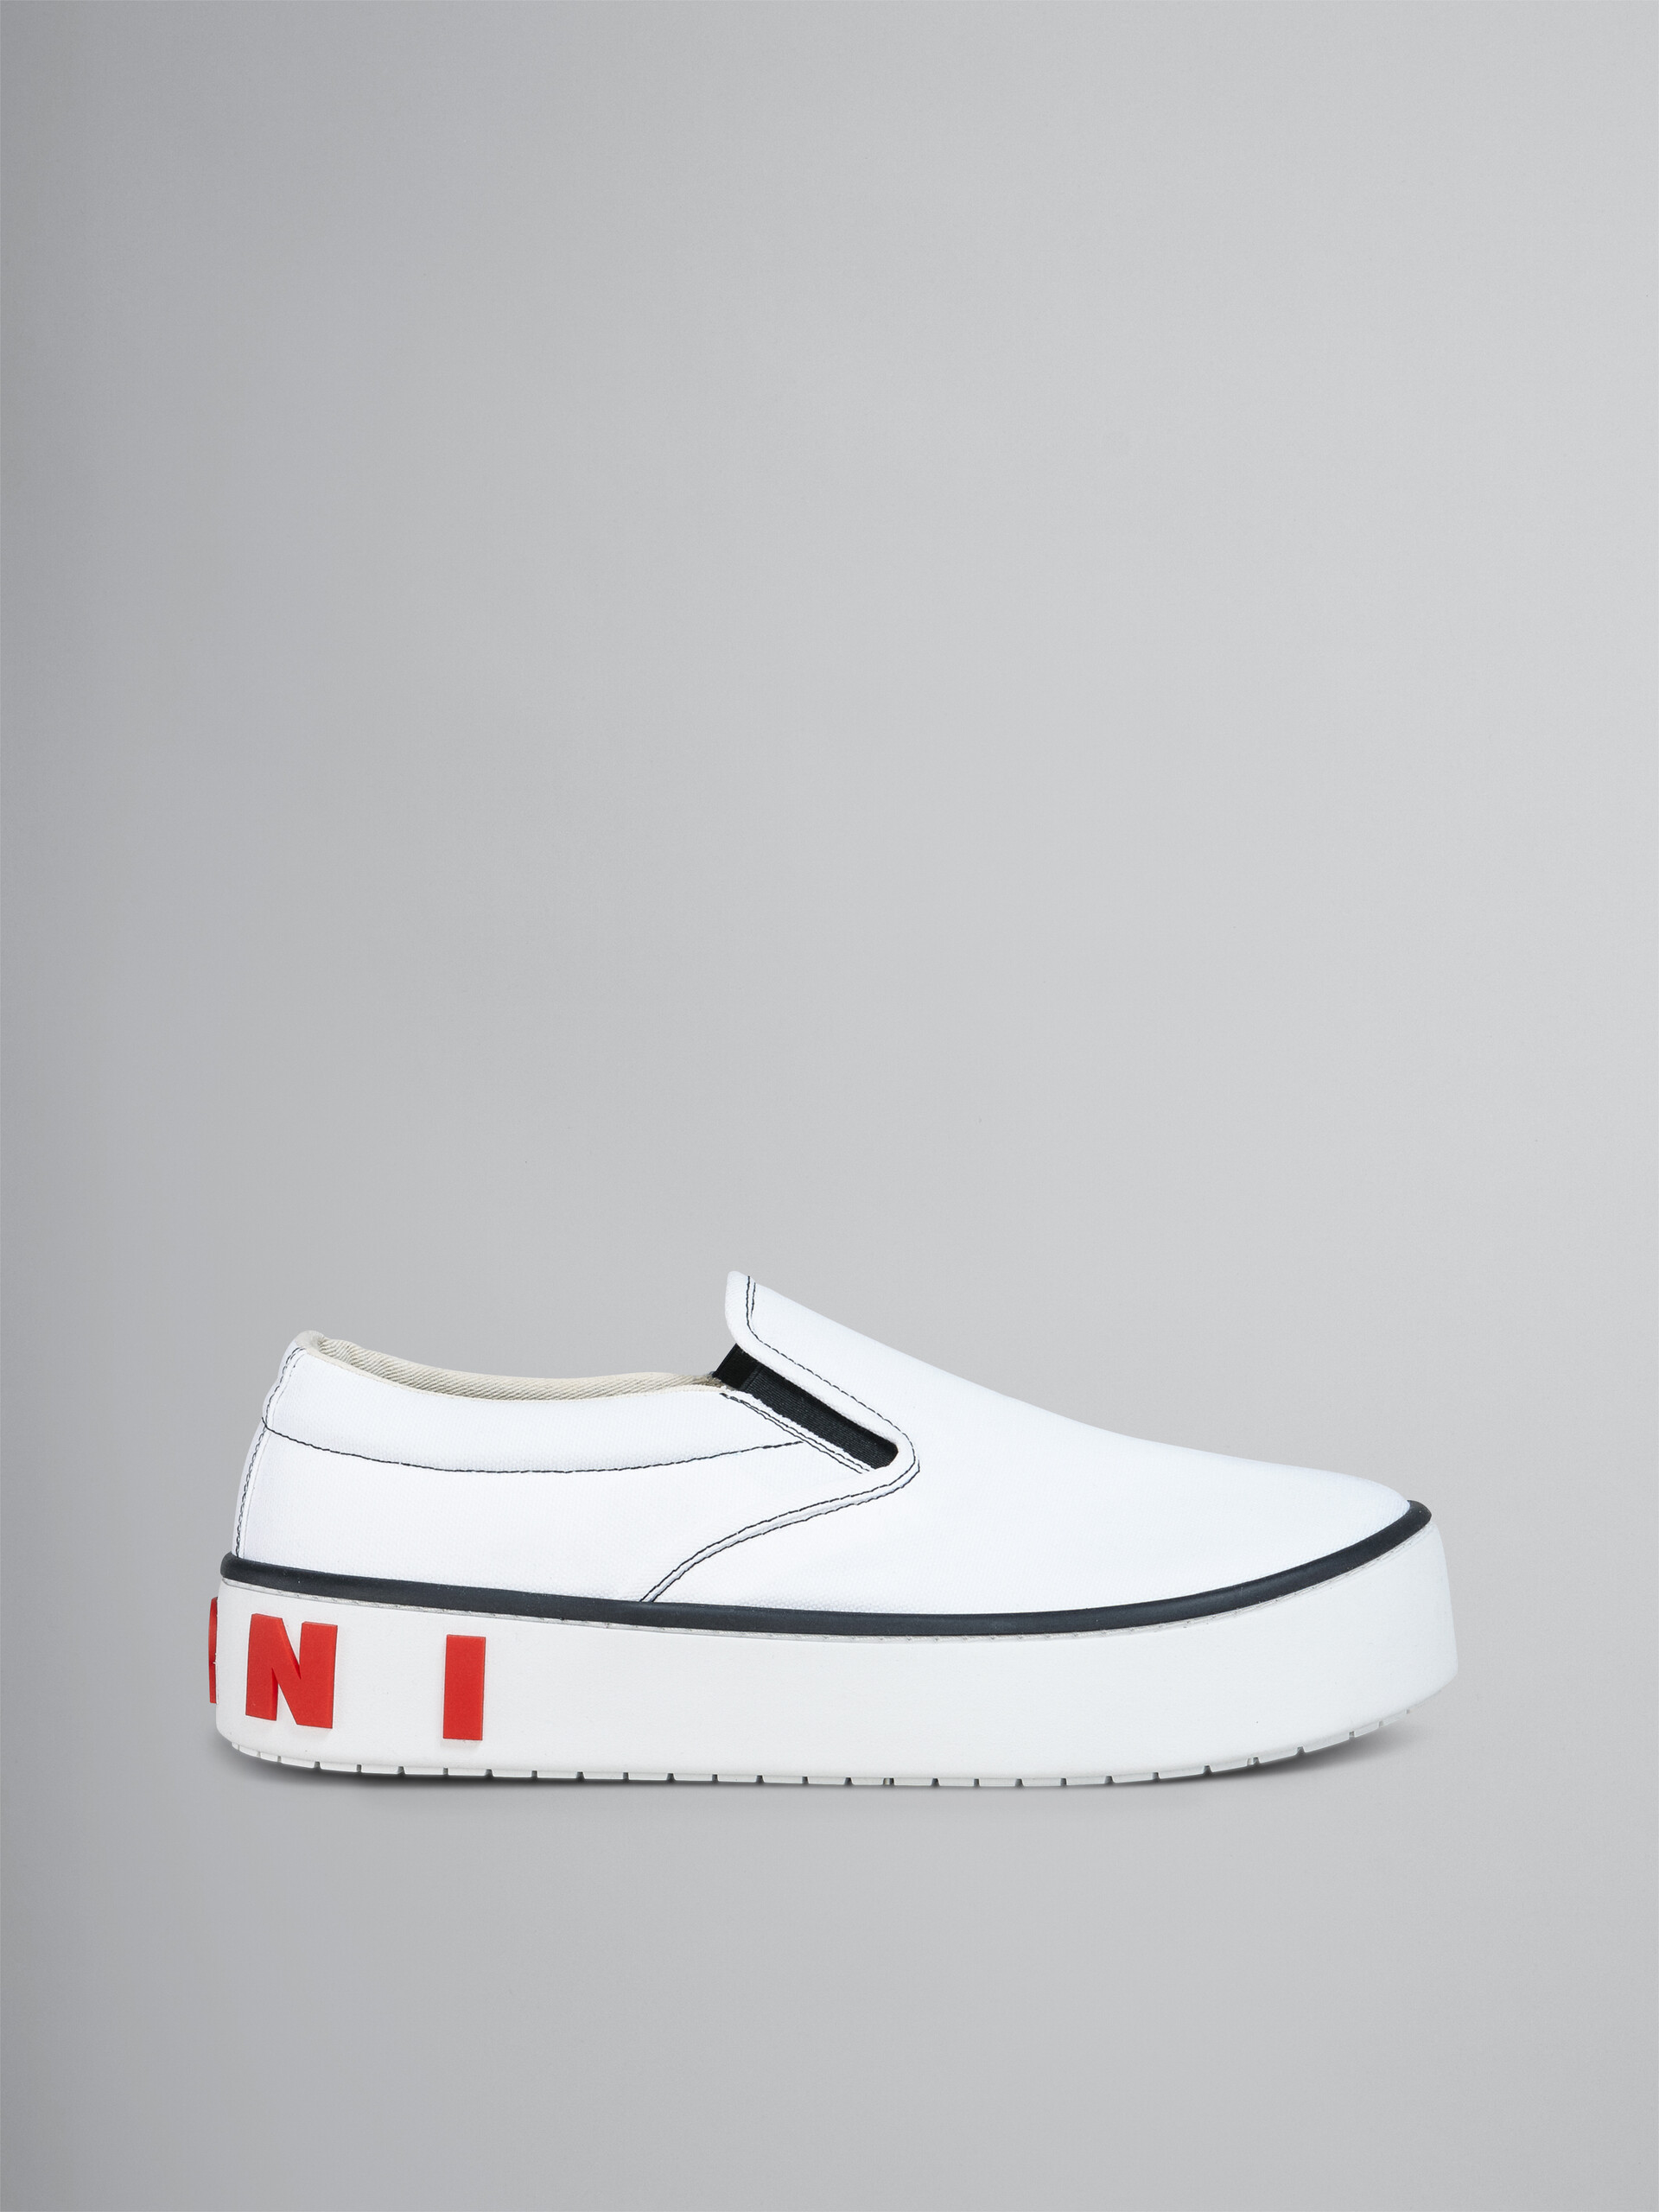 White leather slip-on sneaker with maxi logo - Sneakers - Image 1